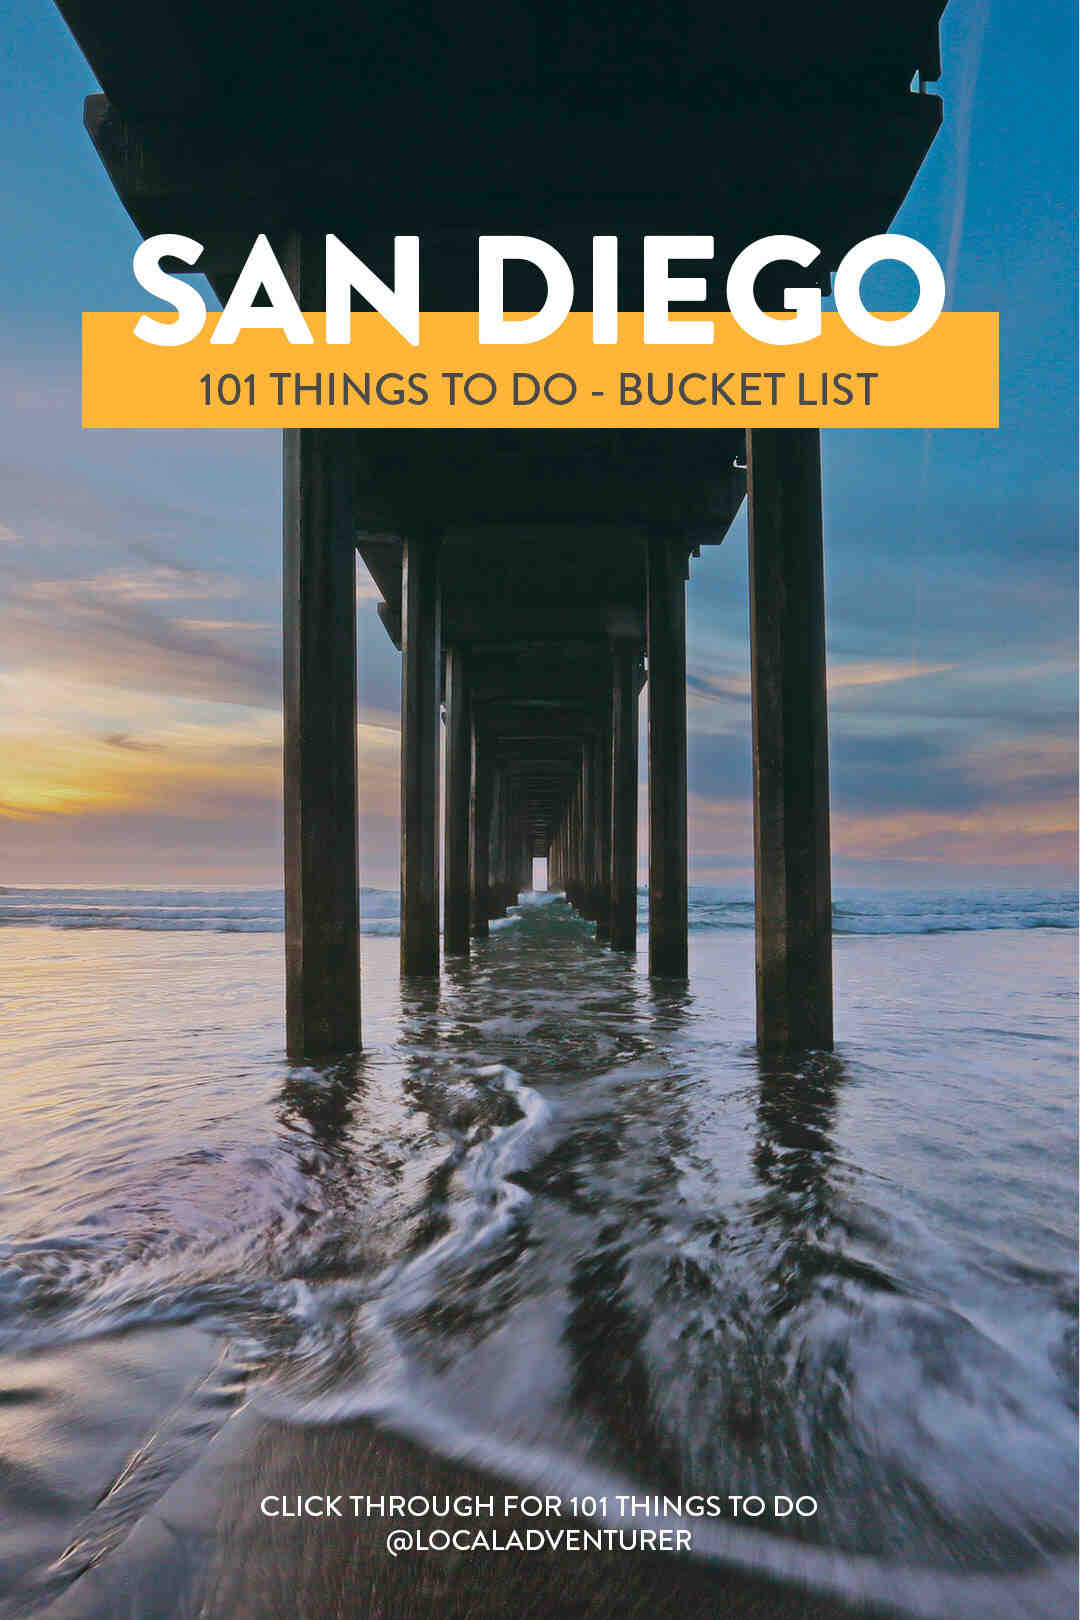 What is San Diego named for?